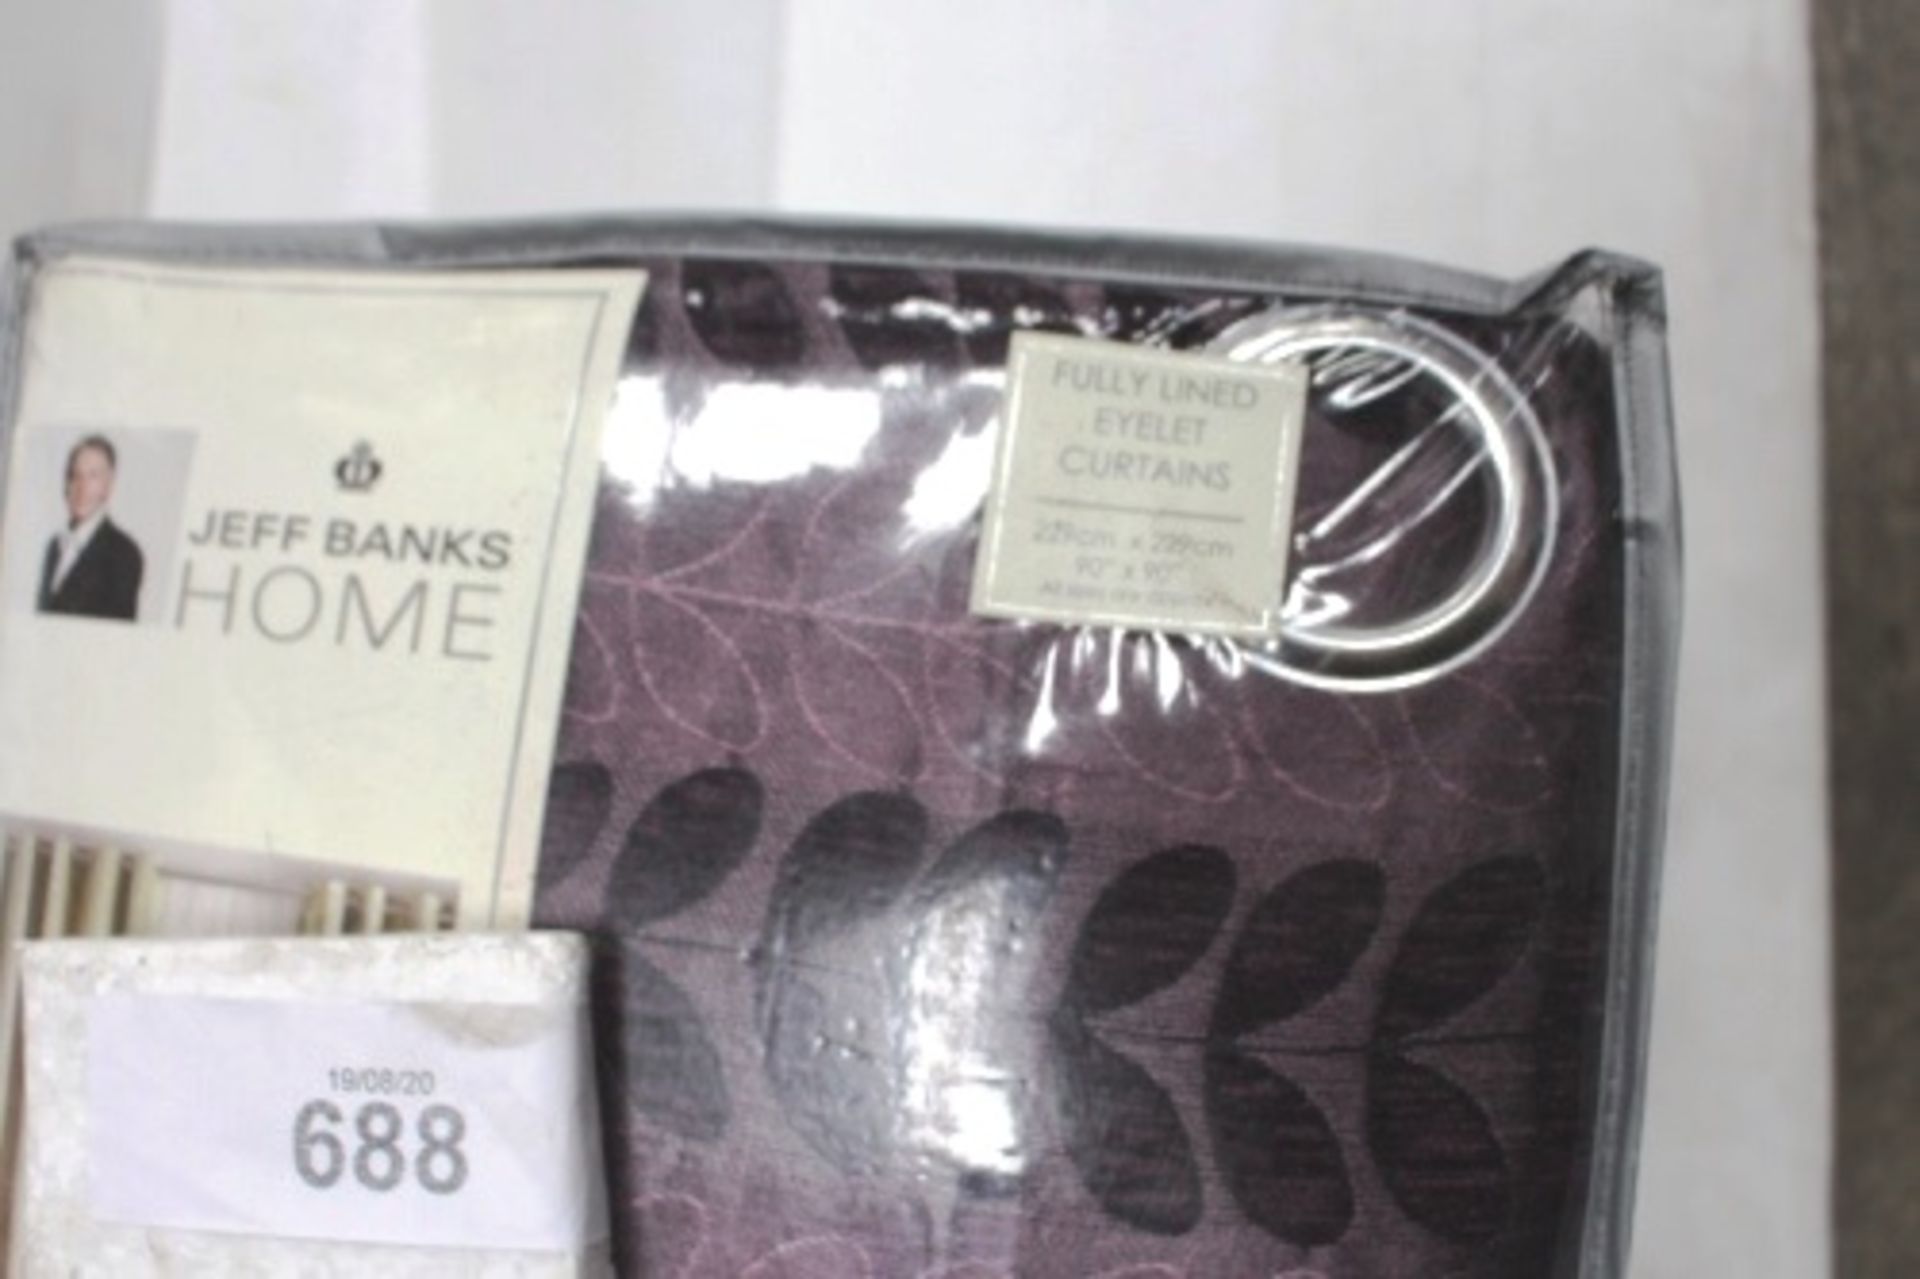 4 x Jeff Banks Home Alison Sierra RMC aubergine fully lined curtains, size 229 x 229cm - New in - Image 2 of 3